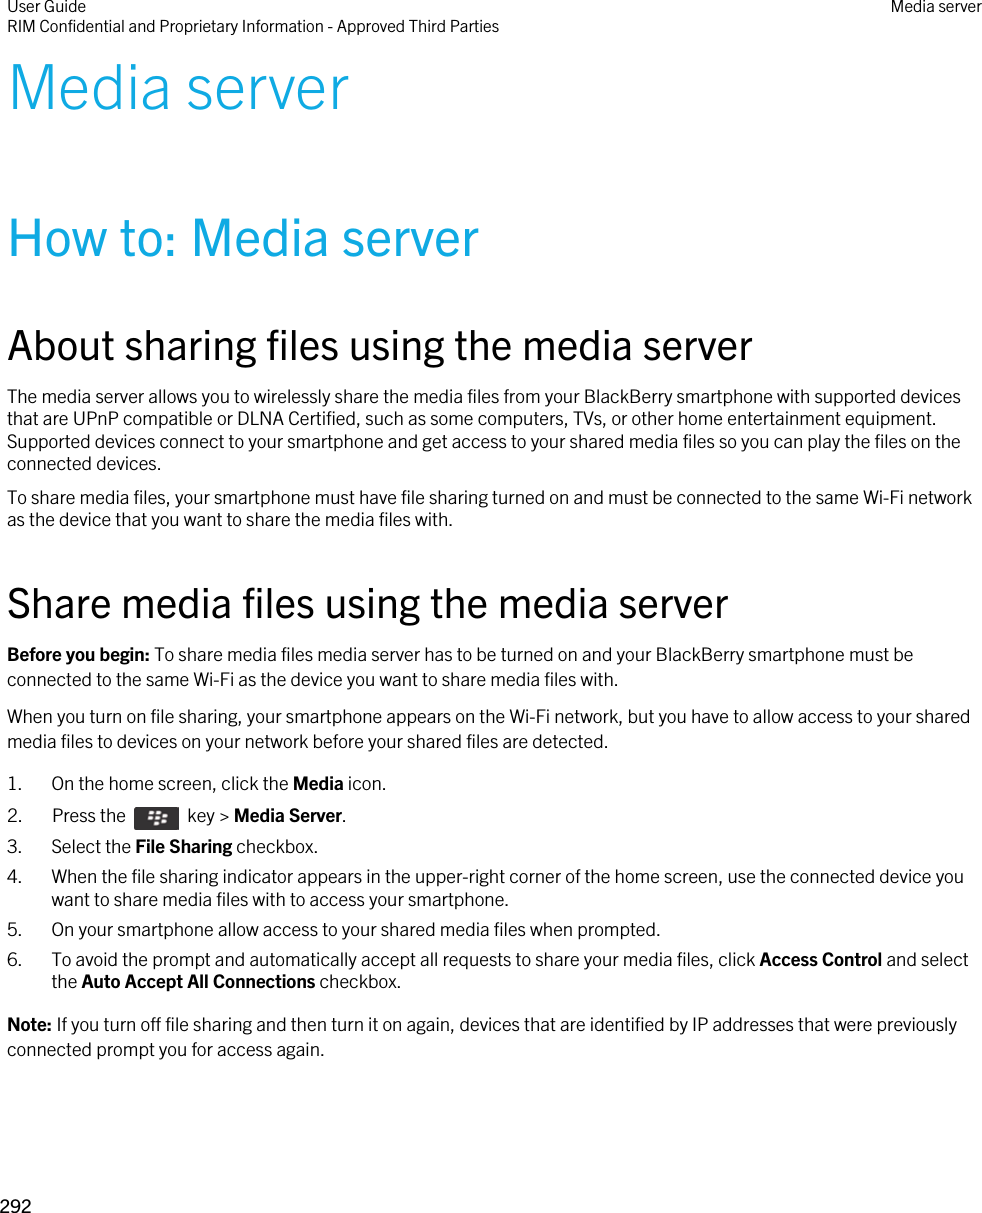 Media serverHow to: Media serverAbout sharing files using the media serverThe media server allows you to wirelessly share the media files from your BlackBerry smartphone with supported devices that are UPnP compatible or DLNA Certified, such as some computers, TVs, or other home entertainment equipment. Supported devices connect to your smartphone and get access to your shared media files so you can play the files on the connected devices.To share media files, your smartphone must have file sharing turned on and must be connected to the same Wi-Fi network as the device that you want to share the media files with.Share media files using the media serverBefore you begin: To share media files media server has to be turned on and your BlackBerry smartphone must be connected to the same Wi-Fi as the device you want to share media files with.When you turn on file sharing, your smartphone appears on the Wi-Fi network, but you have to allow access to your shared media files to devices on your network before your shared files are detected.1. On the home screen, click the Media icon.2.  Press the    key &gt; Media Server.3. Select the File Sharing checkbox.4. When the file sharing indicator appears in the upper-right corner of the home screen, use the connected device you want to share media files with to access your smartphone.5. On your smartphone allow access to your shared media files when prompted.6. To avoid the prompt and automatically accept all requests to share your media files, click Access Control and select the Auto Accept All Connections checkbox.Note: If you turn off file sharing and then turn it on again, devices that are identified by IP addresses that were previously connected prompt you for access again.User GuideRIM Confidential and Proprietary Information - Approved Third Parties Media server292 